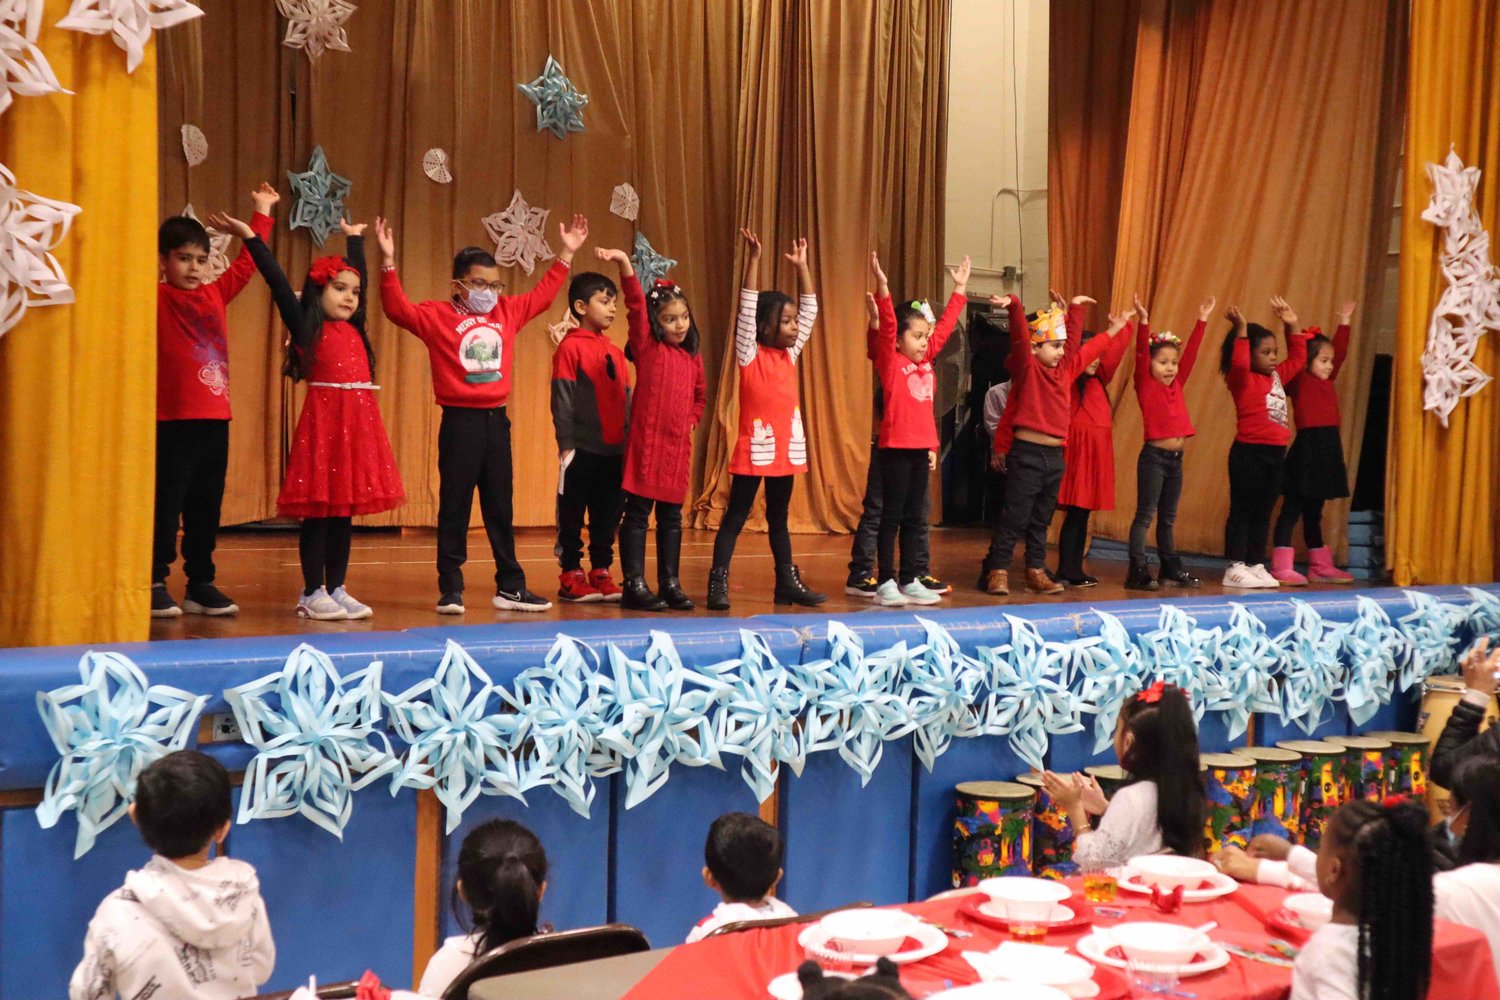 Forest Road Elementary School students took to the stage to perform for loved ones during the annual Winter Wonderland.